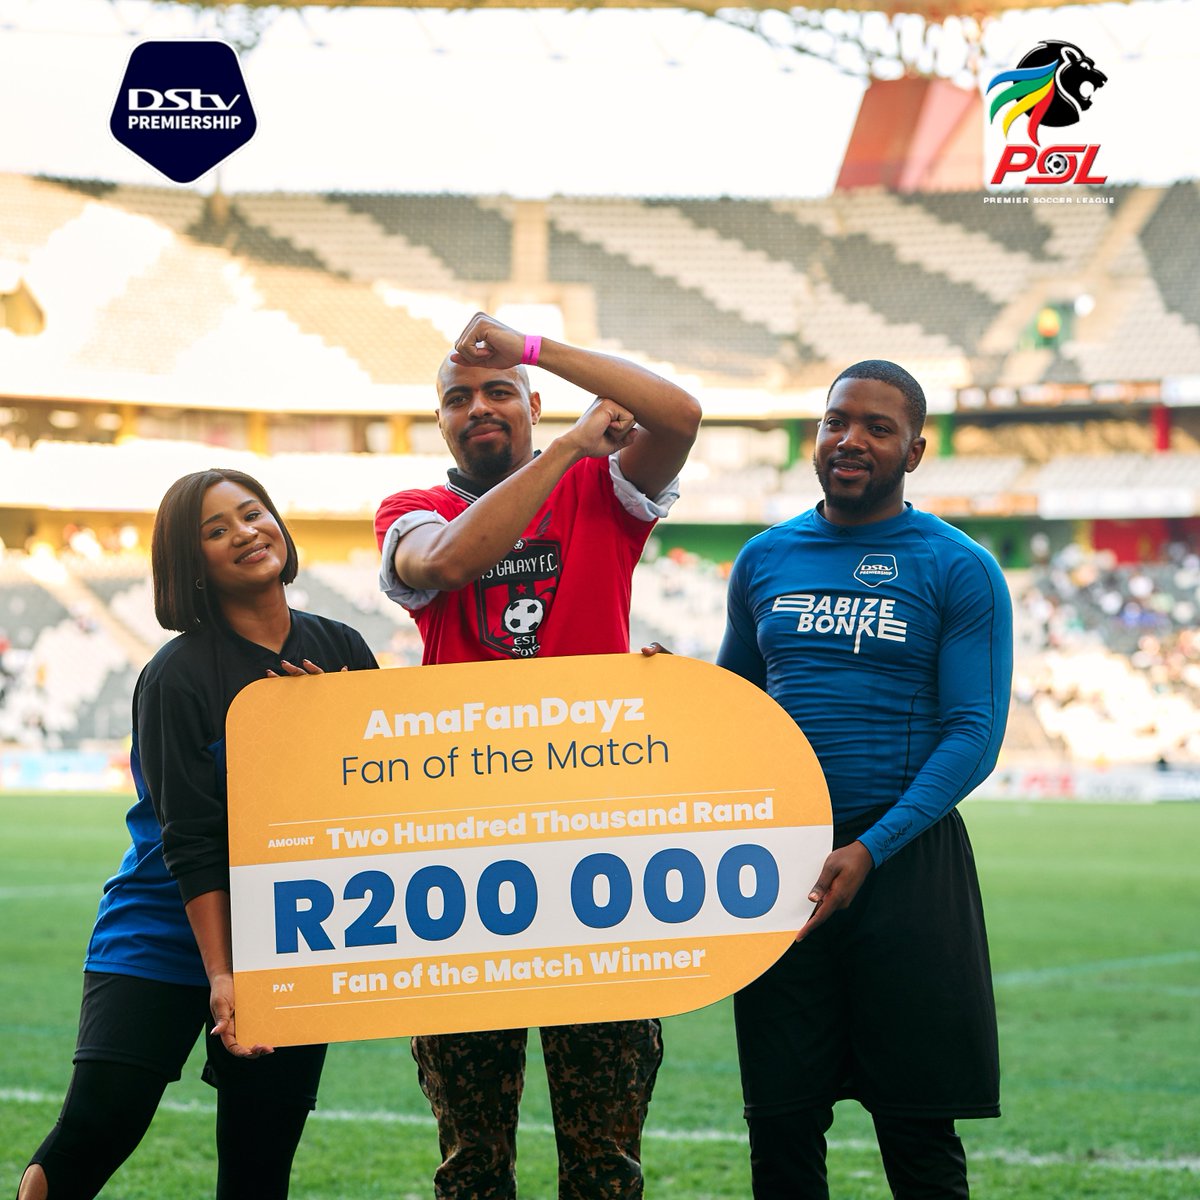 A huge congratulation to Simphiwe Sihlangu, our #AmaFanDayz winner this weekend! They've just bagged an incredible R200 000 at Mbombela Stadium 💸⚽️